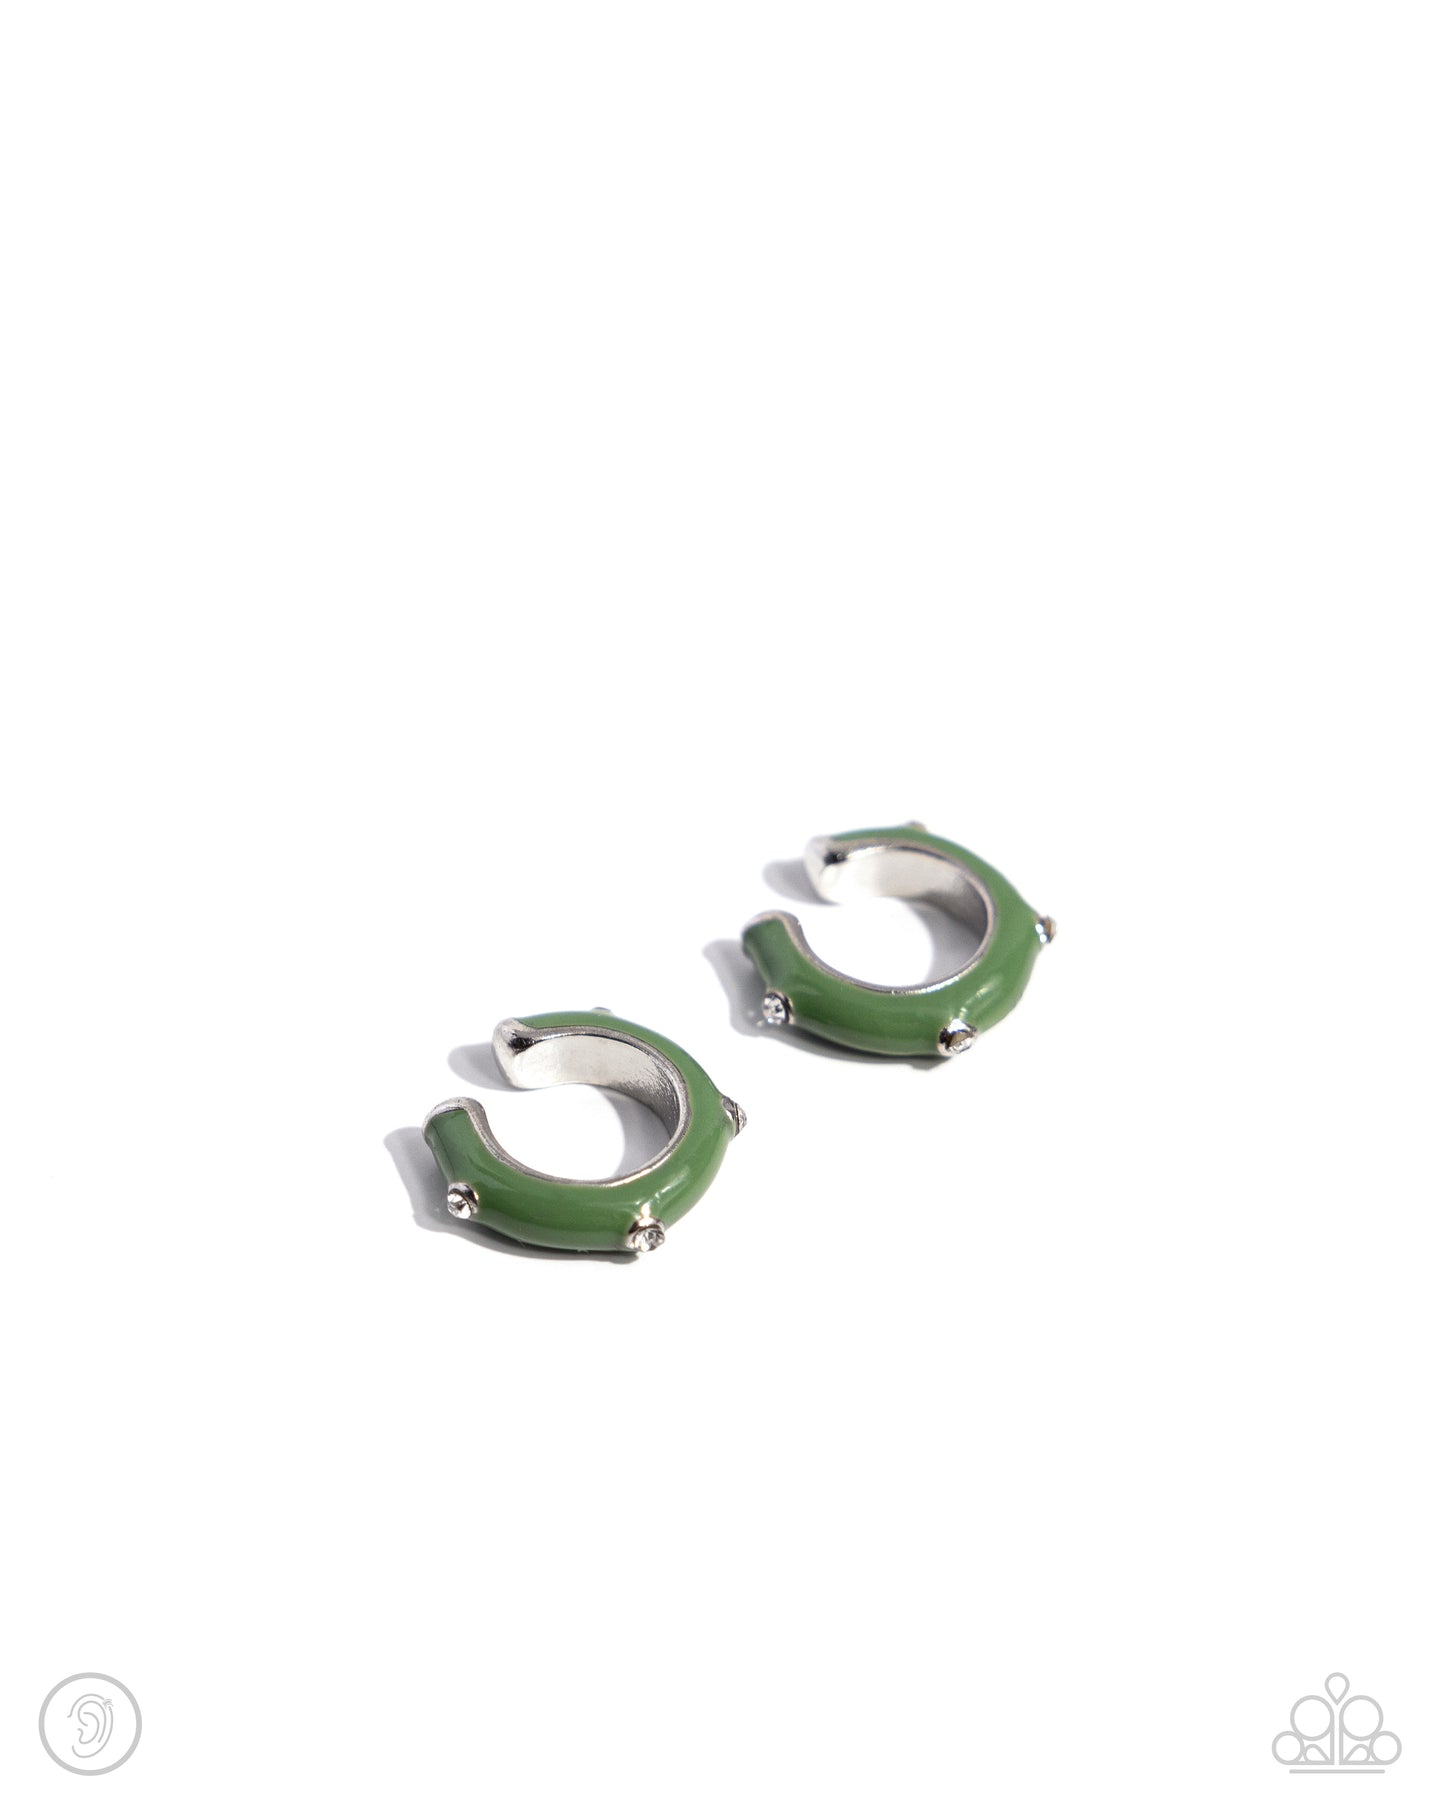 <p>Paparazzi Accessories - Coastal Color - Green Ear Cuffs featuring a green painted surface, a white rhinestone-dotted silver cuff curls around the ear, creating an adjustable, one-size-fits-all colorful cuff.</p> <p><i>Sold as one pair of cuff earrings.</i></p>